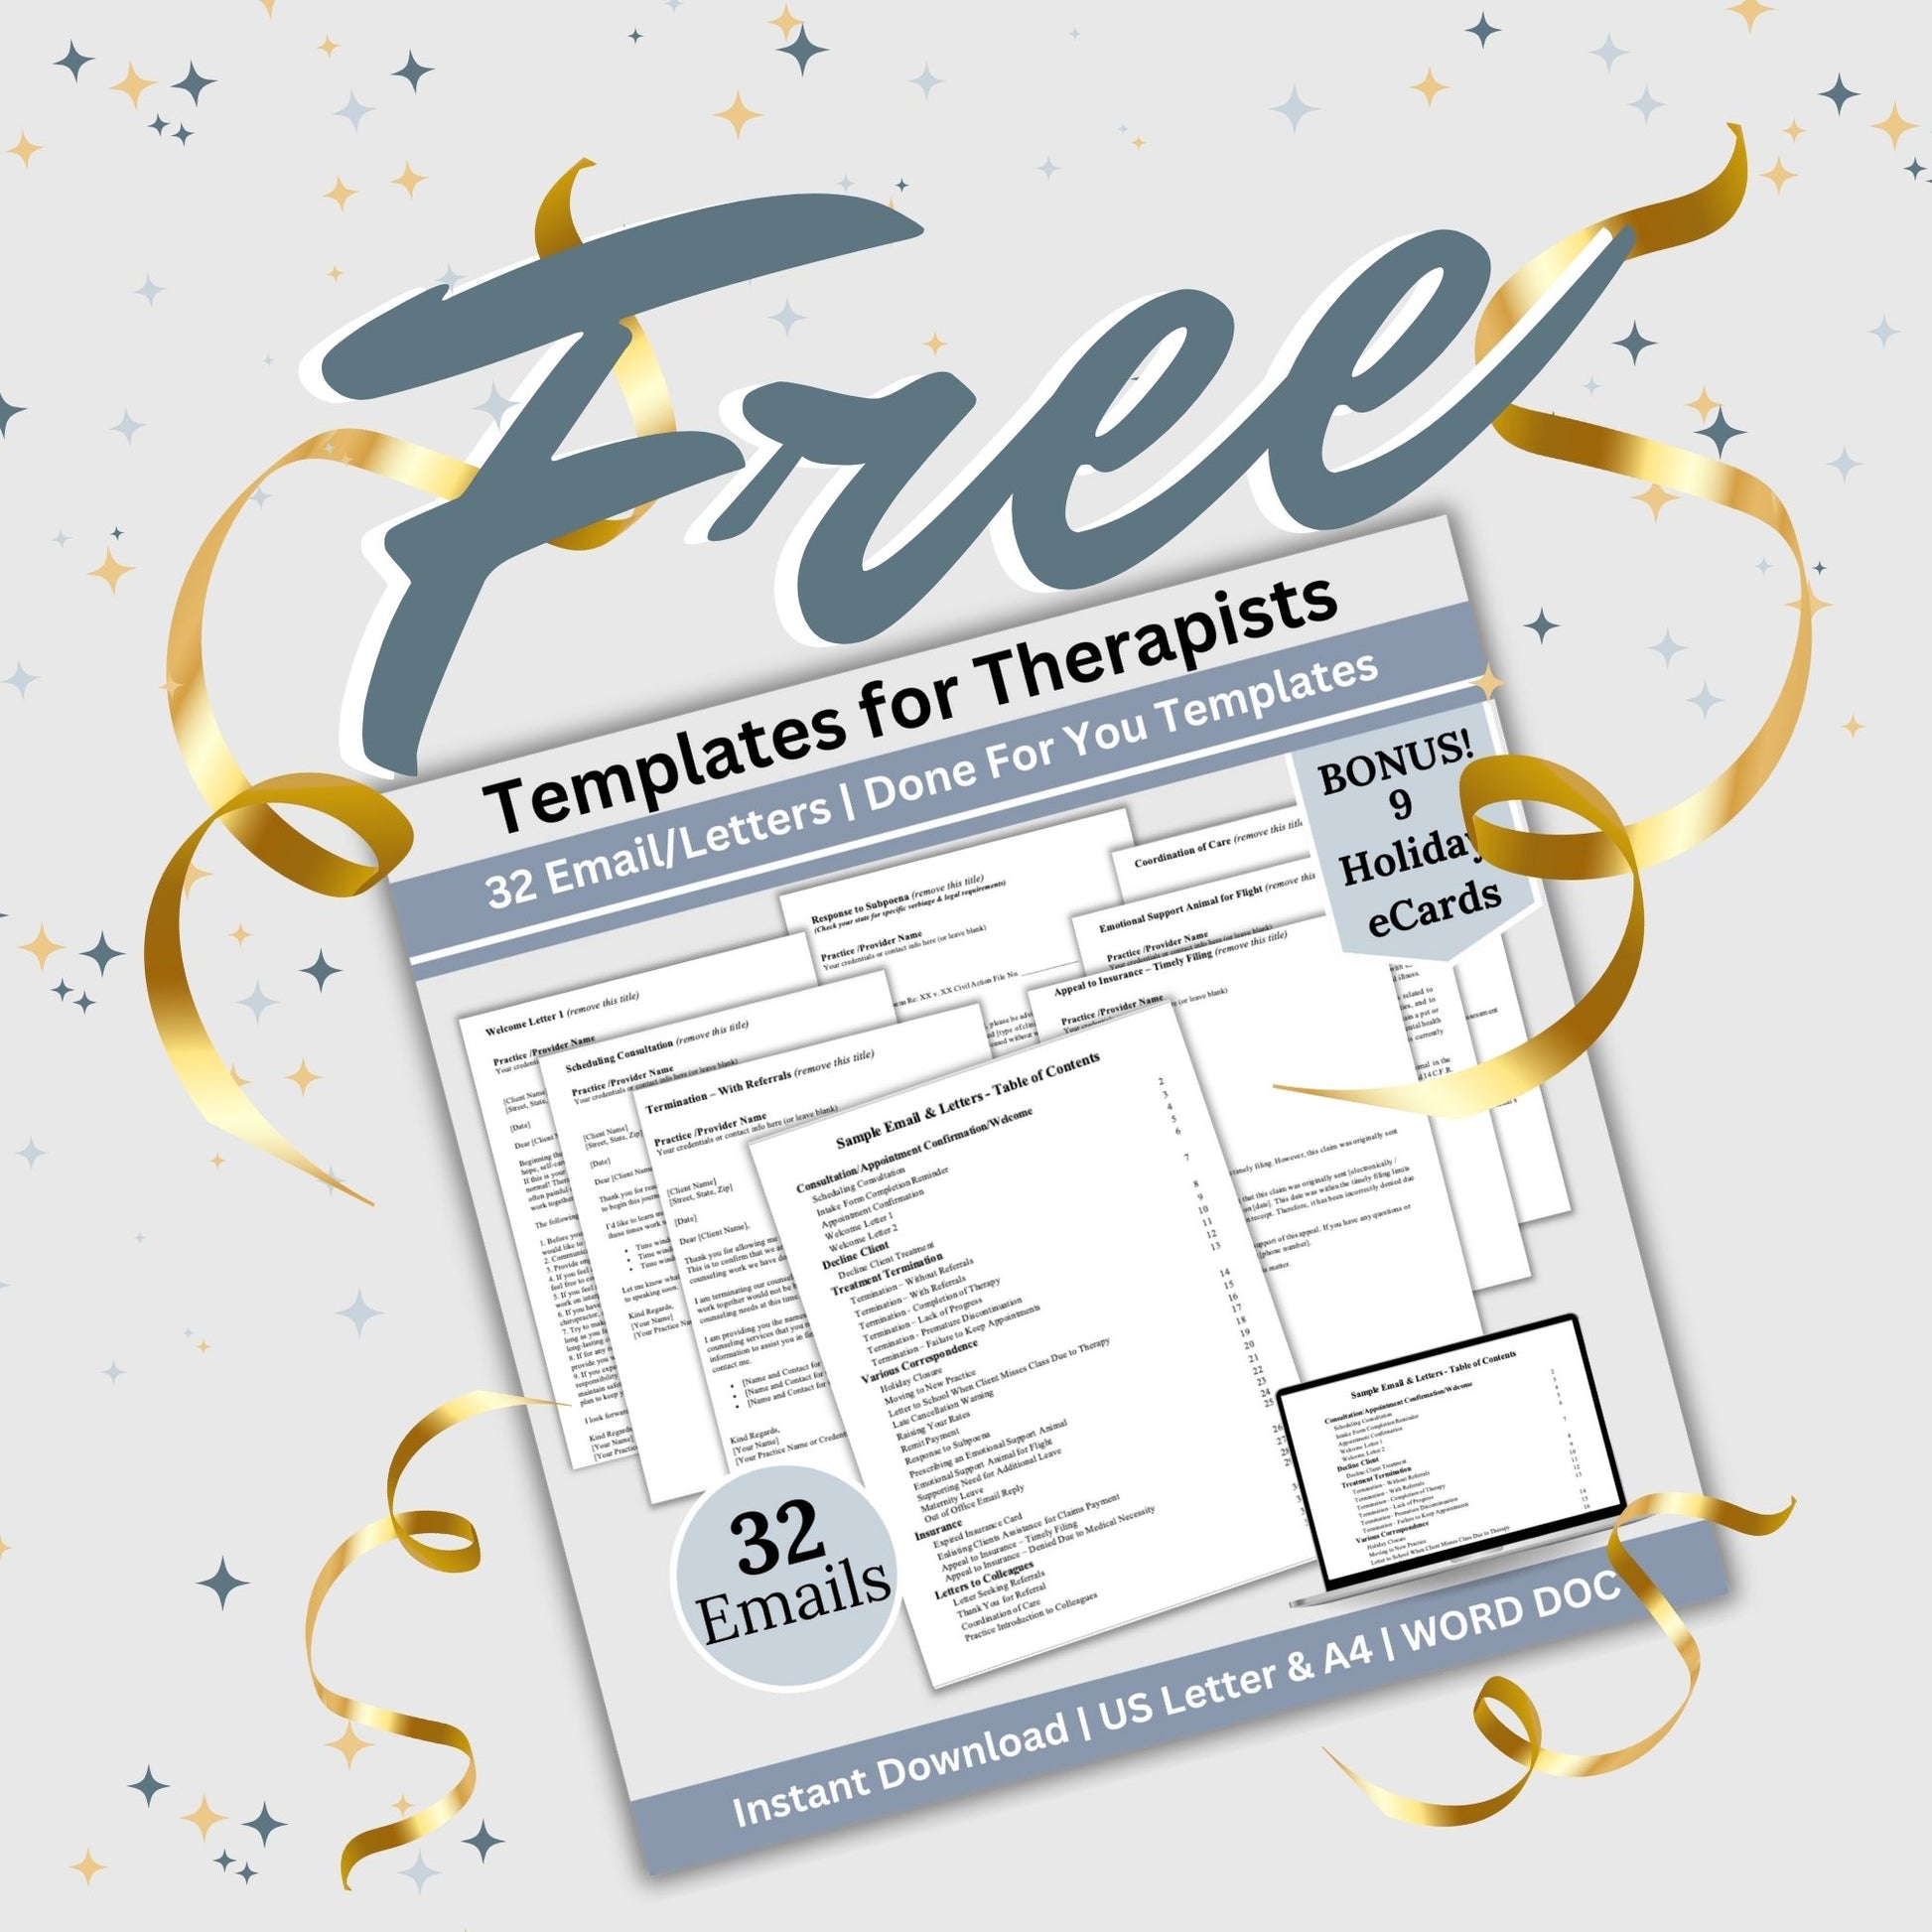 Therapy Cheat Sheet Bundle! Are you a dedicated mental health clinician looking to enhance your practice or therapeutic skills? Look no further – our comprehensive Mental Health Therapists Cheat Sheet Bundle is here to empower you! 30 Resources in 1 Bundle. A Value of $140.00.